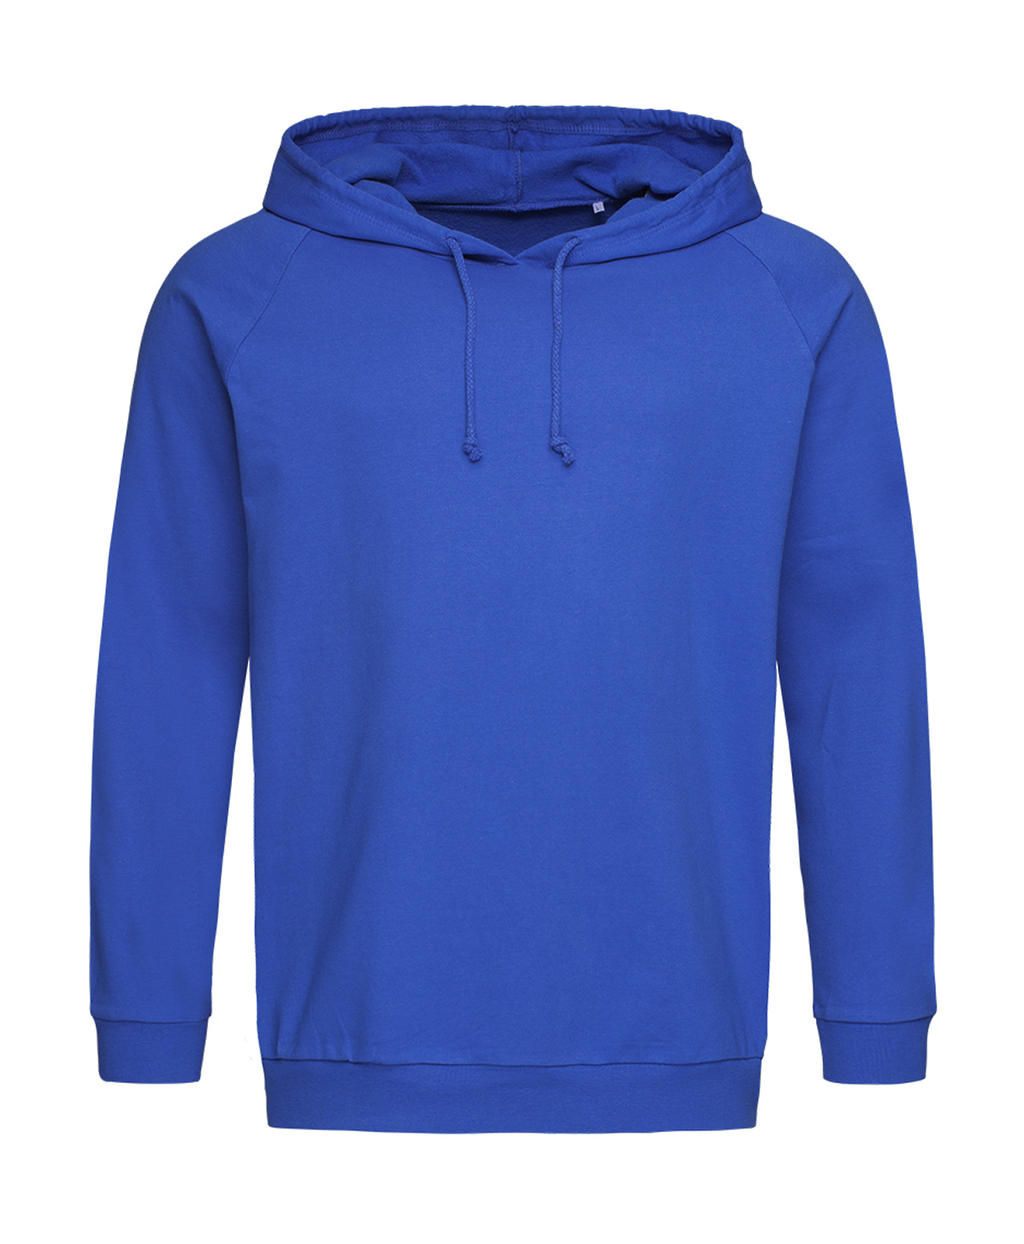  Unisex Sweat Hoodie Light in Farbe Bright Royal